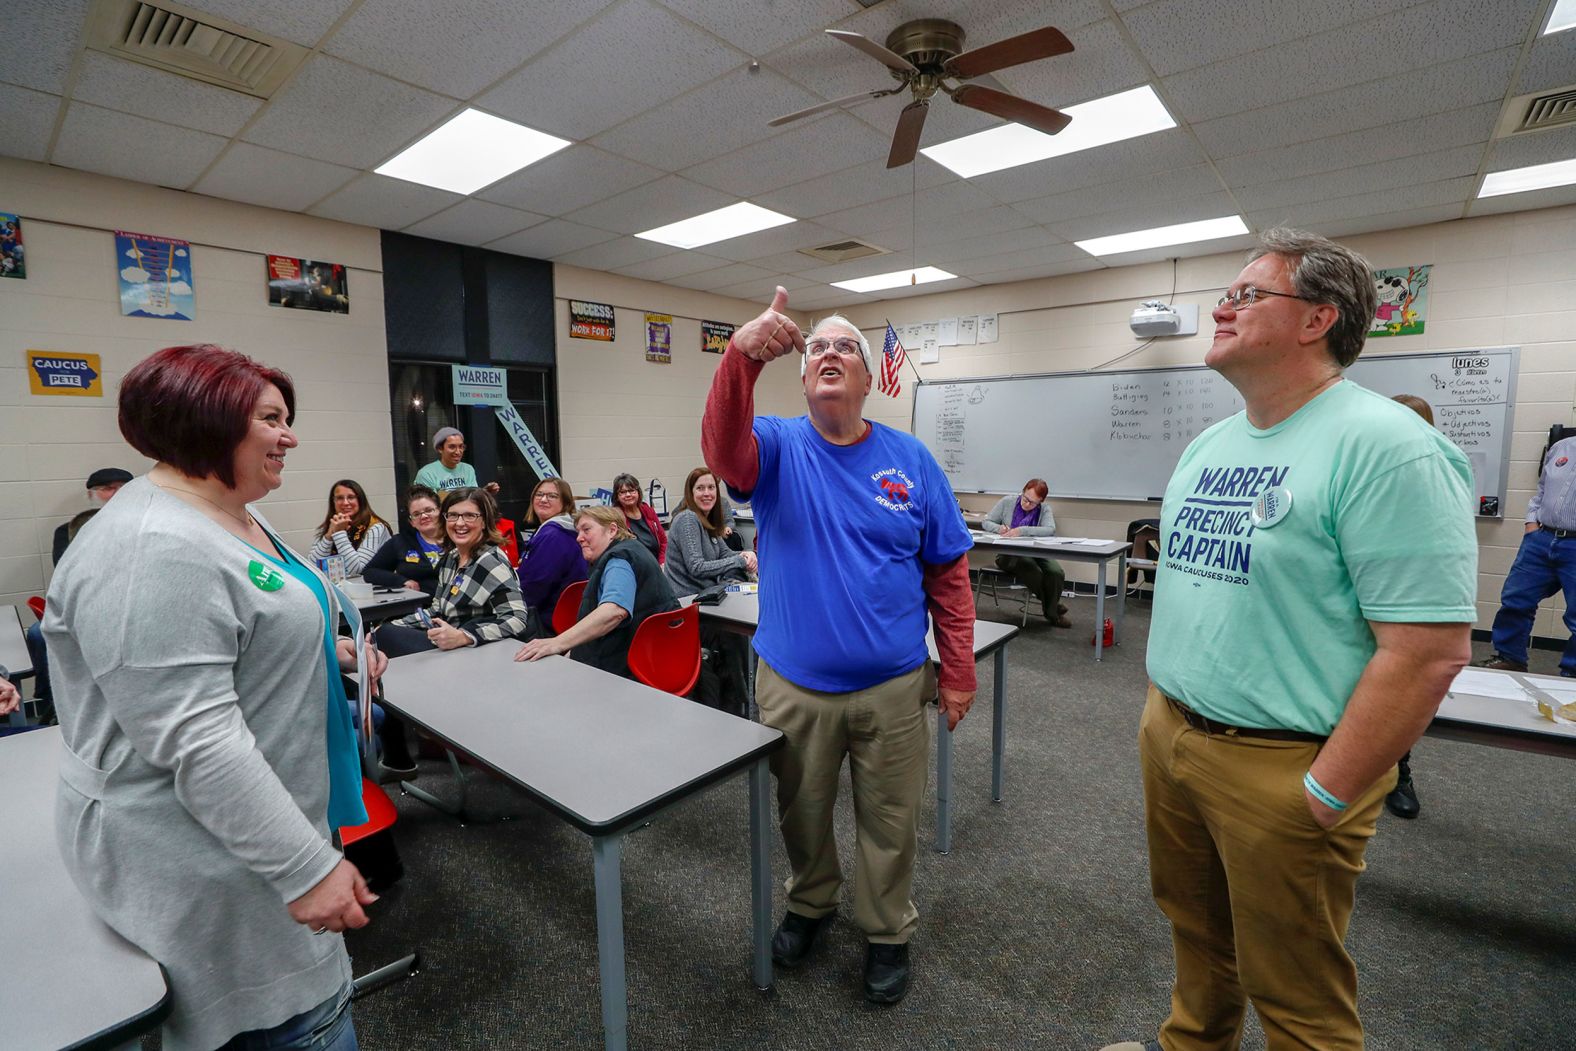 Caucus chairman Steve King flips a coin to determine which candidate has to drop a delegate in Algona, Iowa. At left is Sarah Casey, a Klobuchar supporter. On the right is Chris Brown, a Warren supporter.